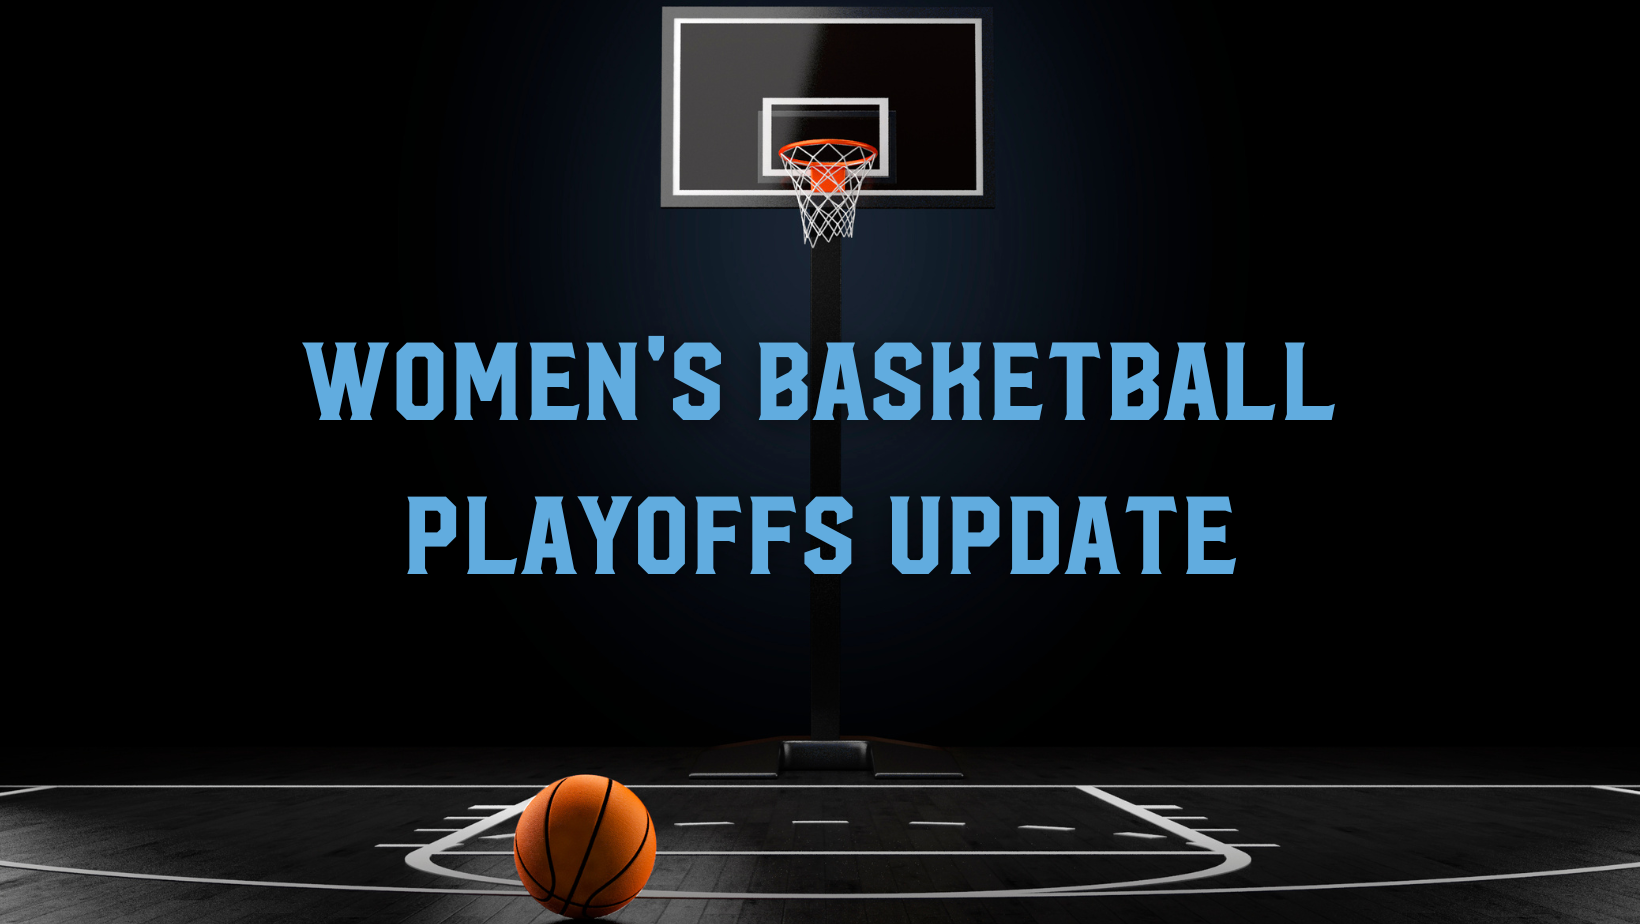 WOMEN'S BASKETBALL SEASON COMES TO AN END IN PLAYOFFS